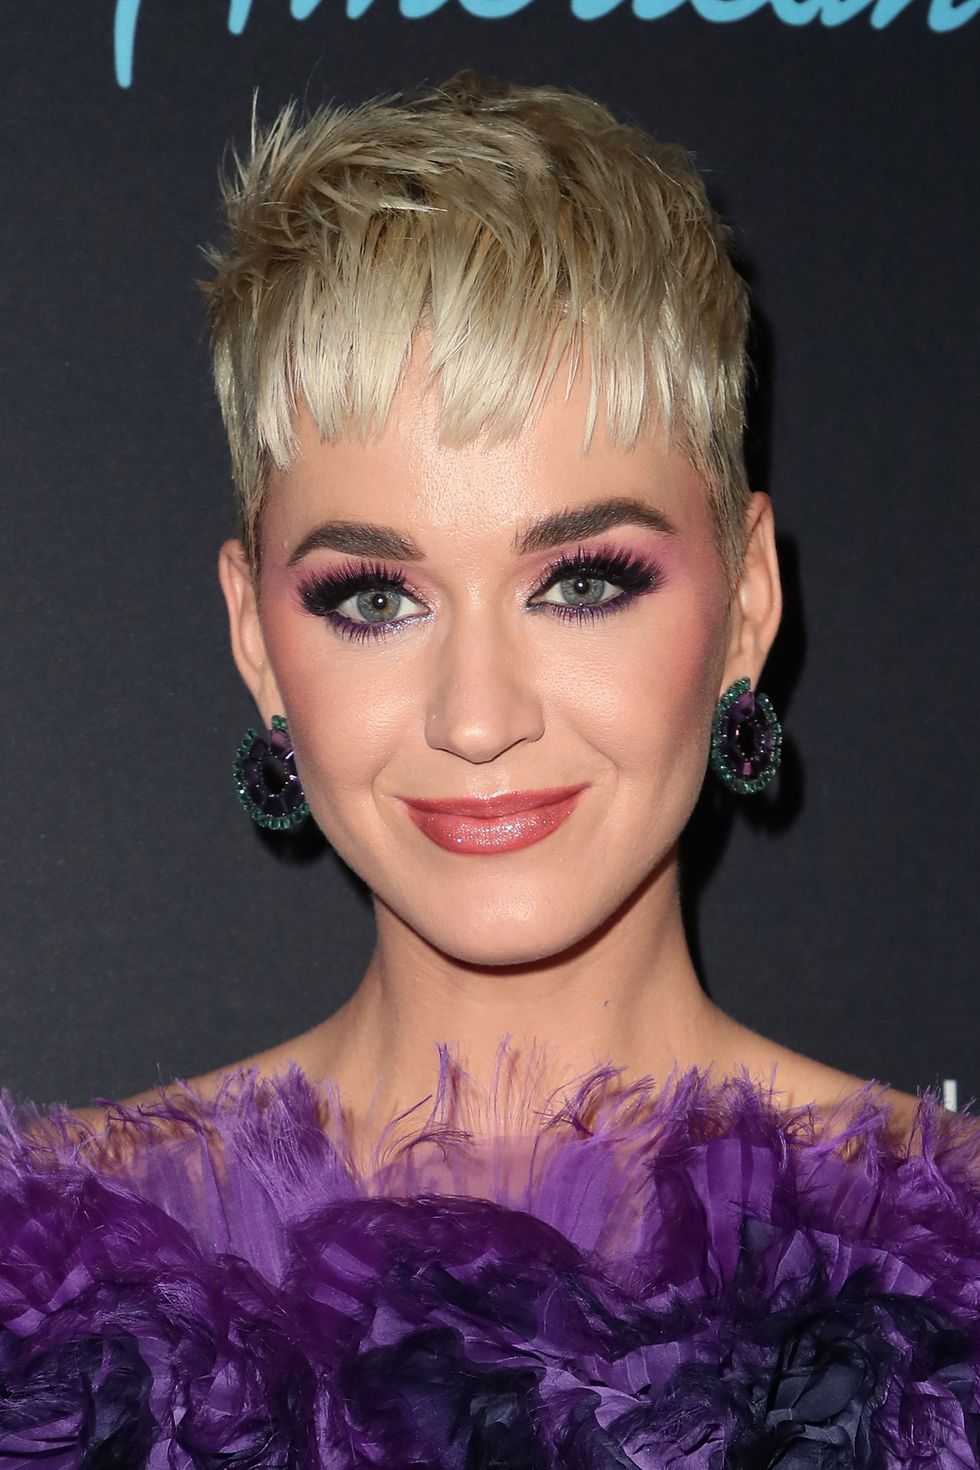 Katy Perry Switches Up Her Look As She Unveils New Hair - Capital